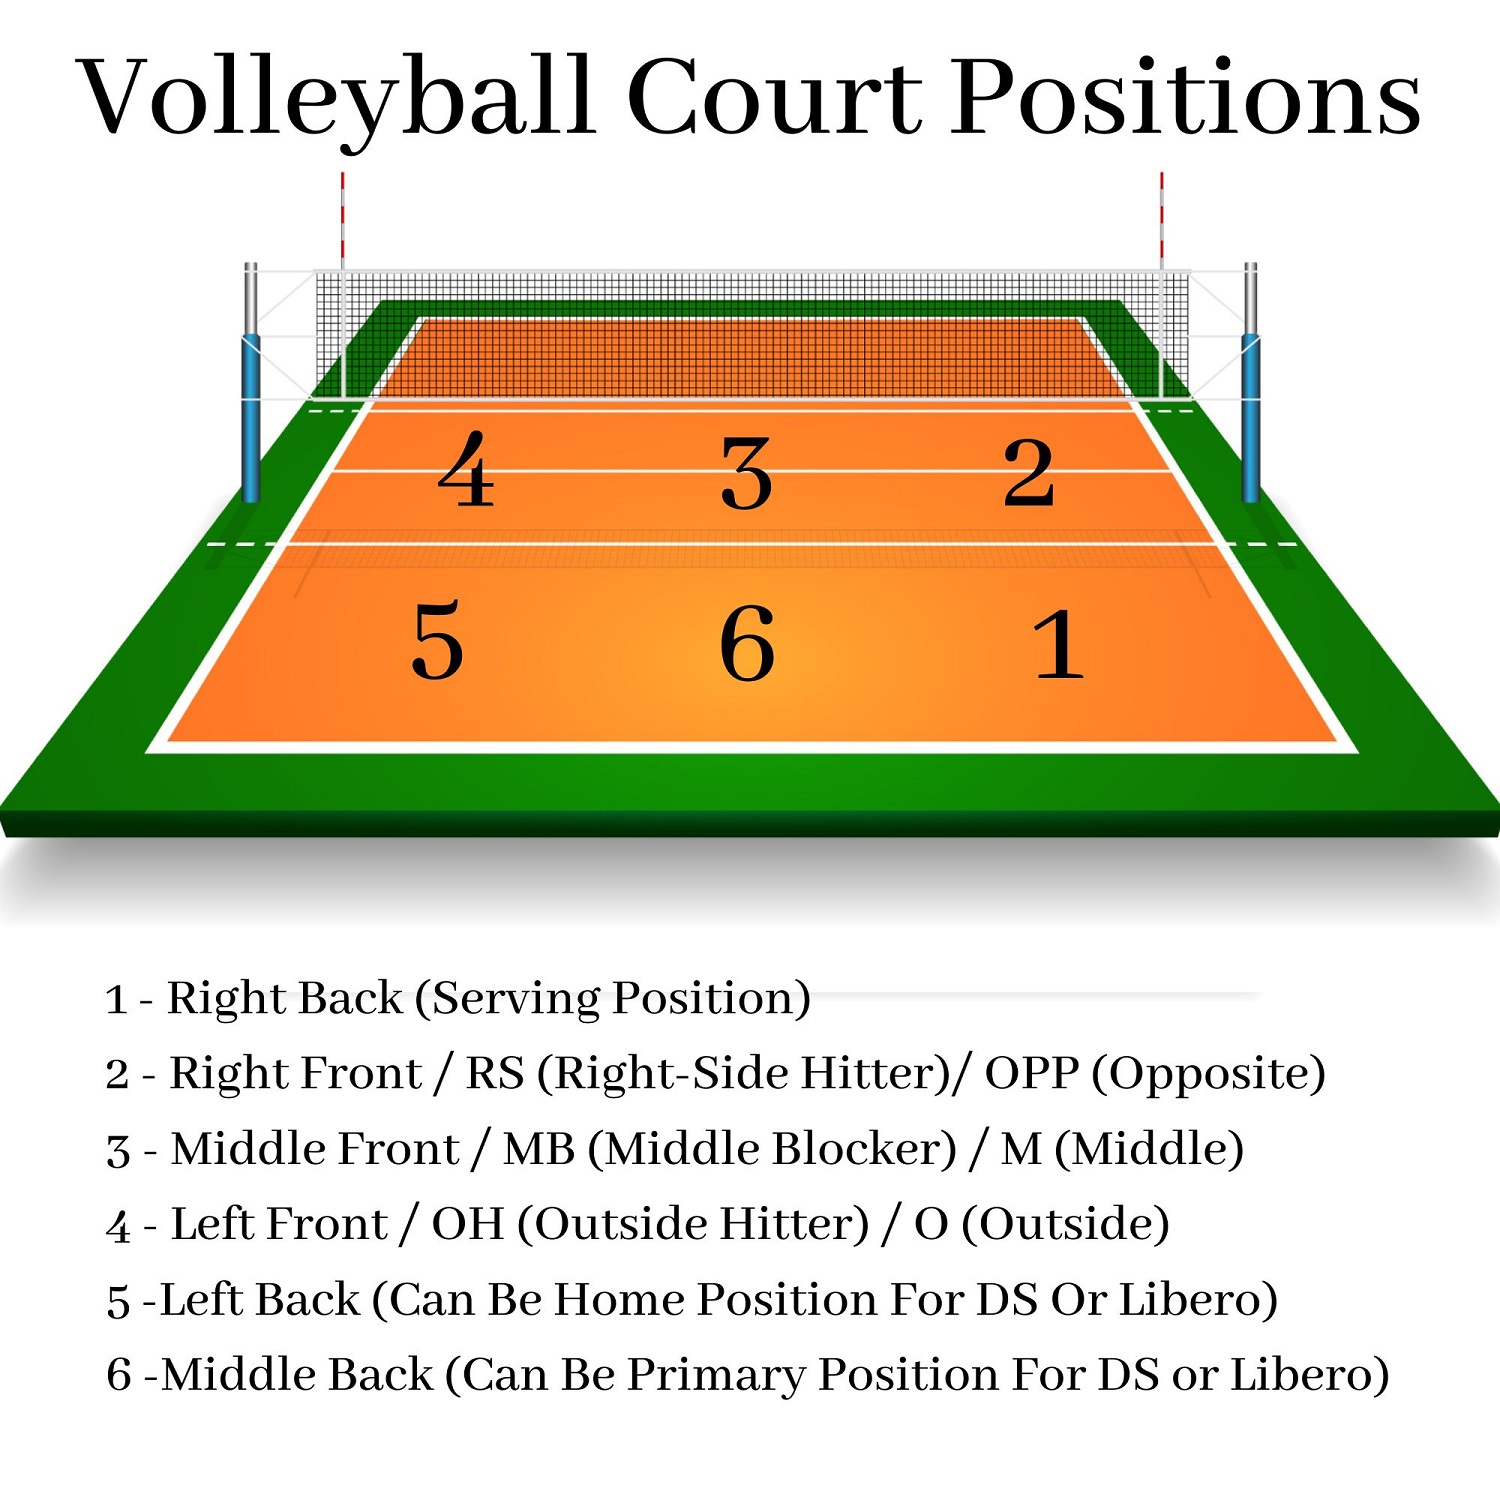 girls-volleyball-positions-court-diagram